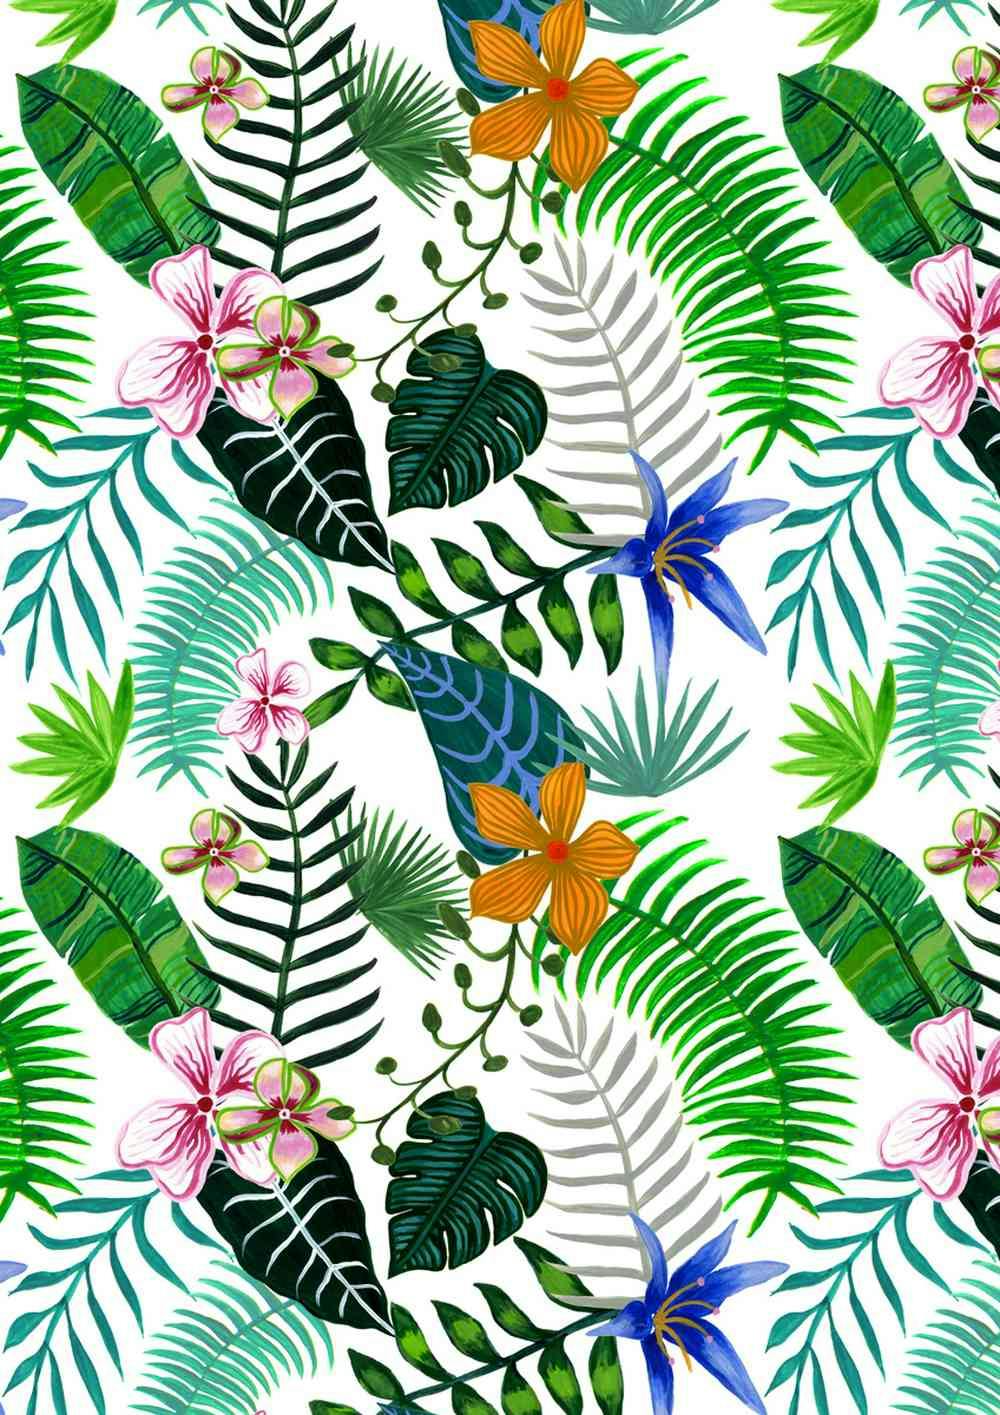 A digital illustration of a repeat pattern of different coloured flowers and leaves. Colours include blues, pinks, creams and oranges.